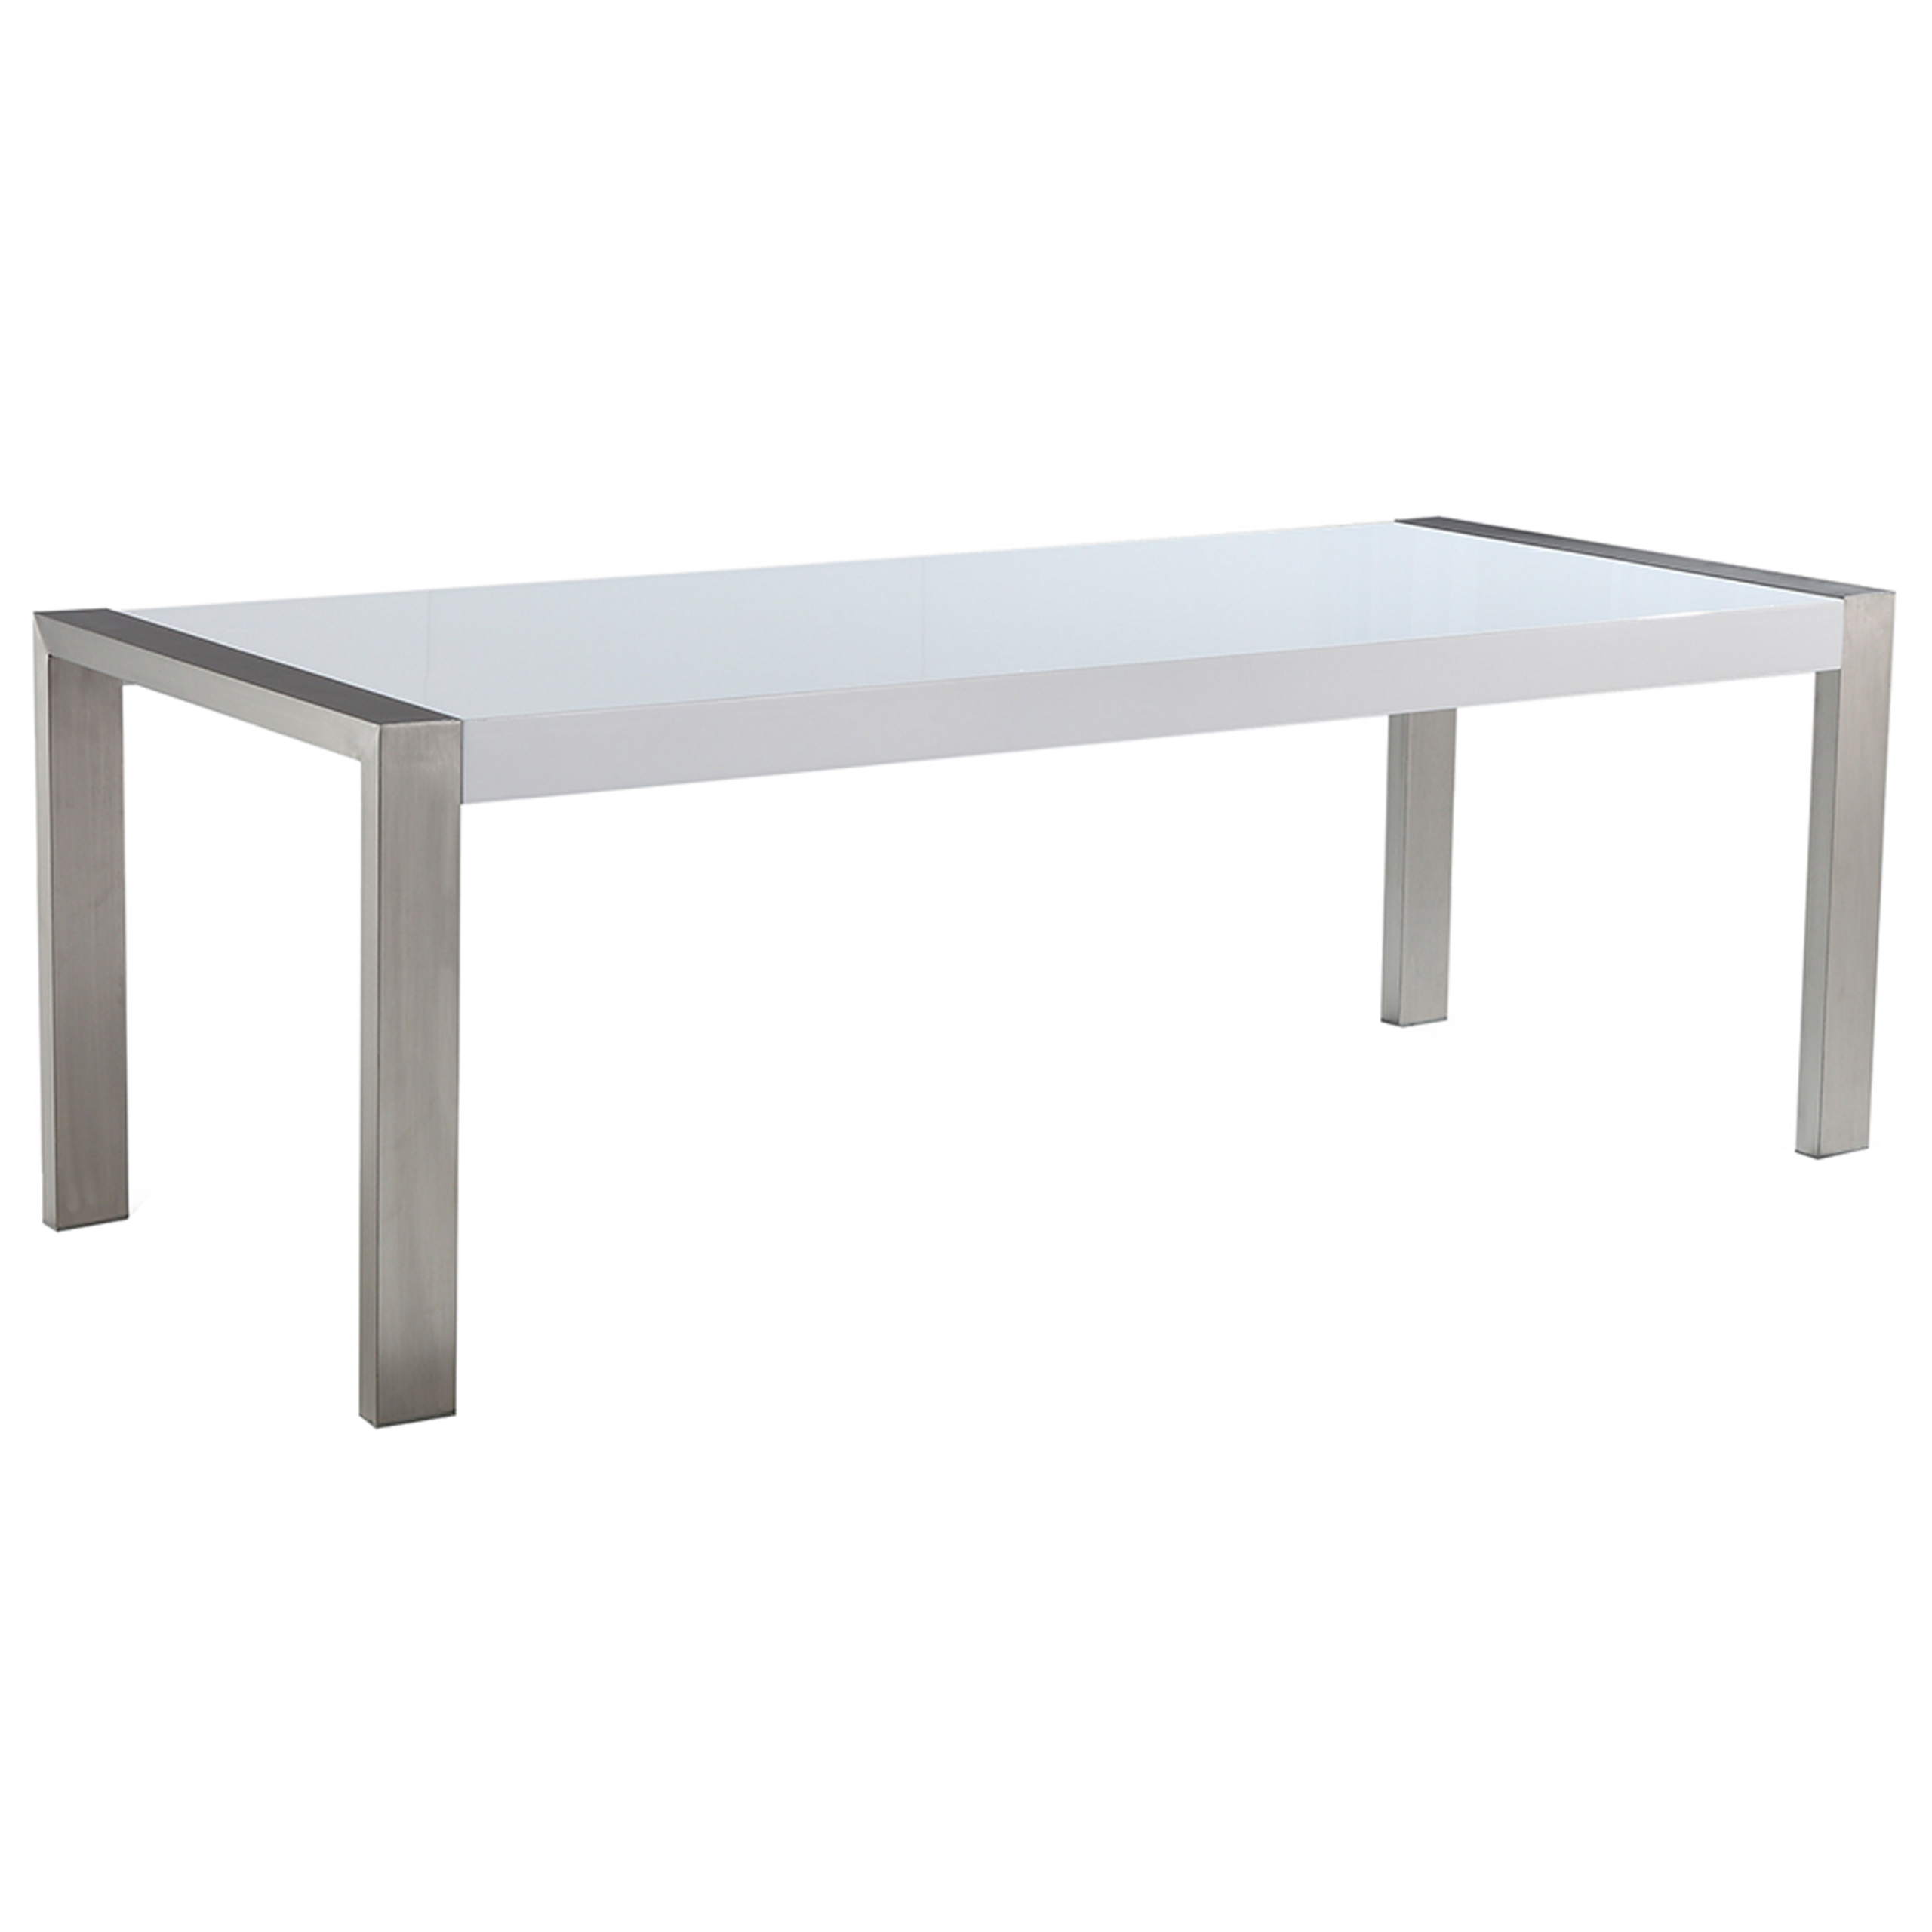 Beliani Dining Room Table White with Silver Legs 8 Seater 220 x 90 x 76 cm Modern Design